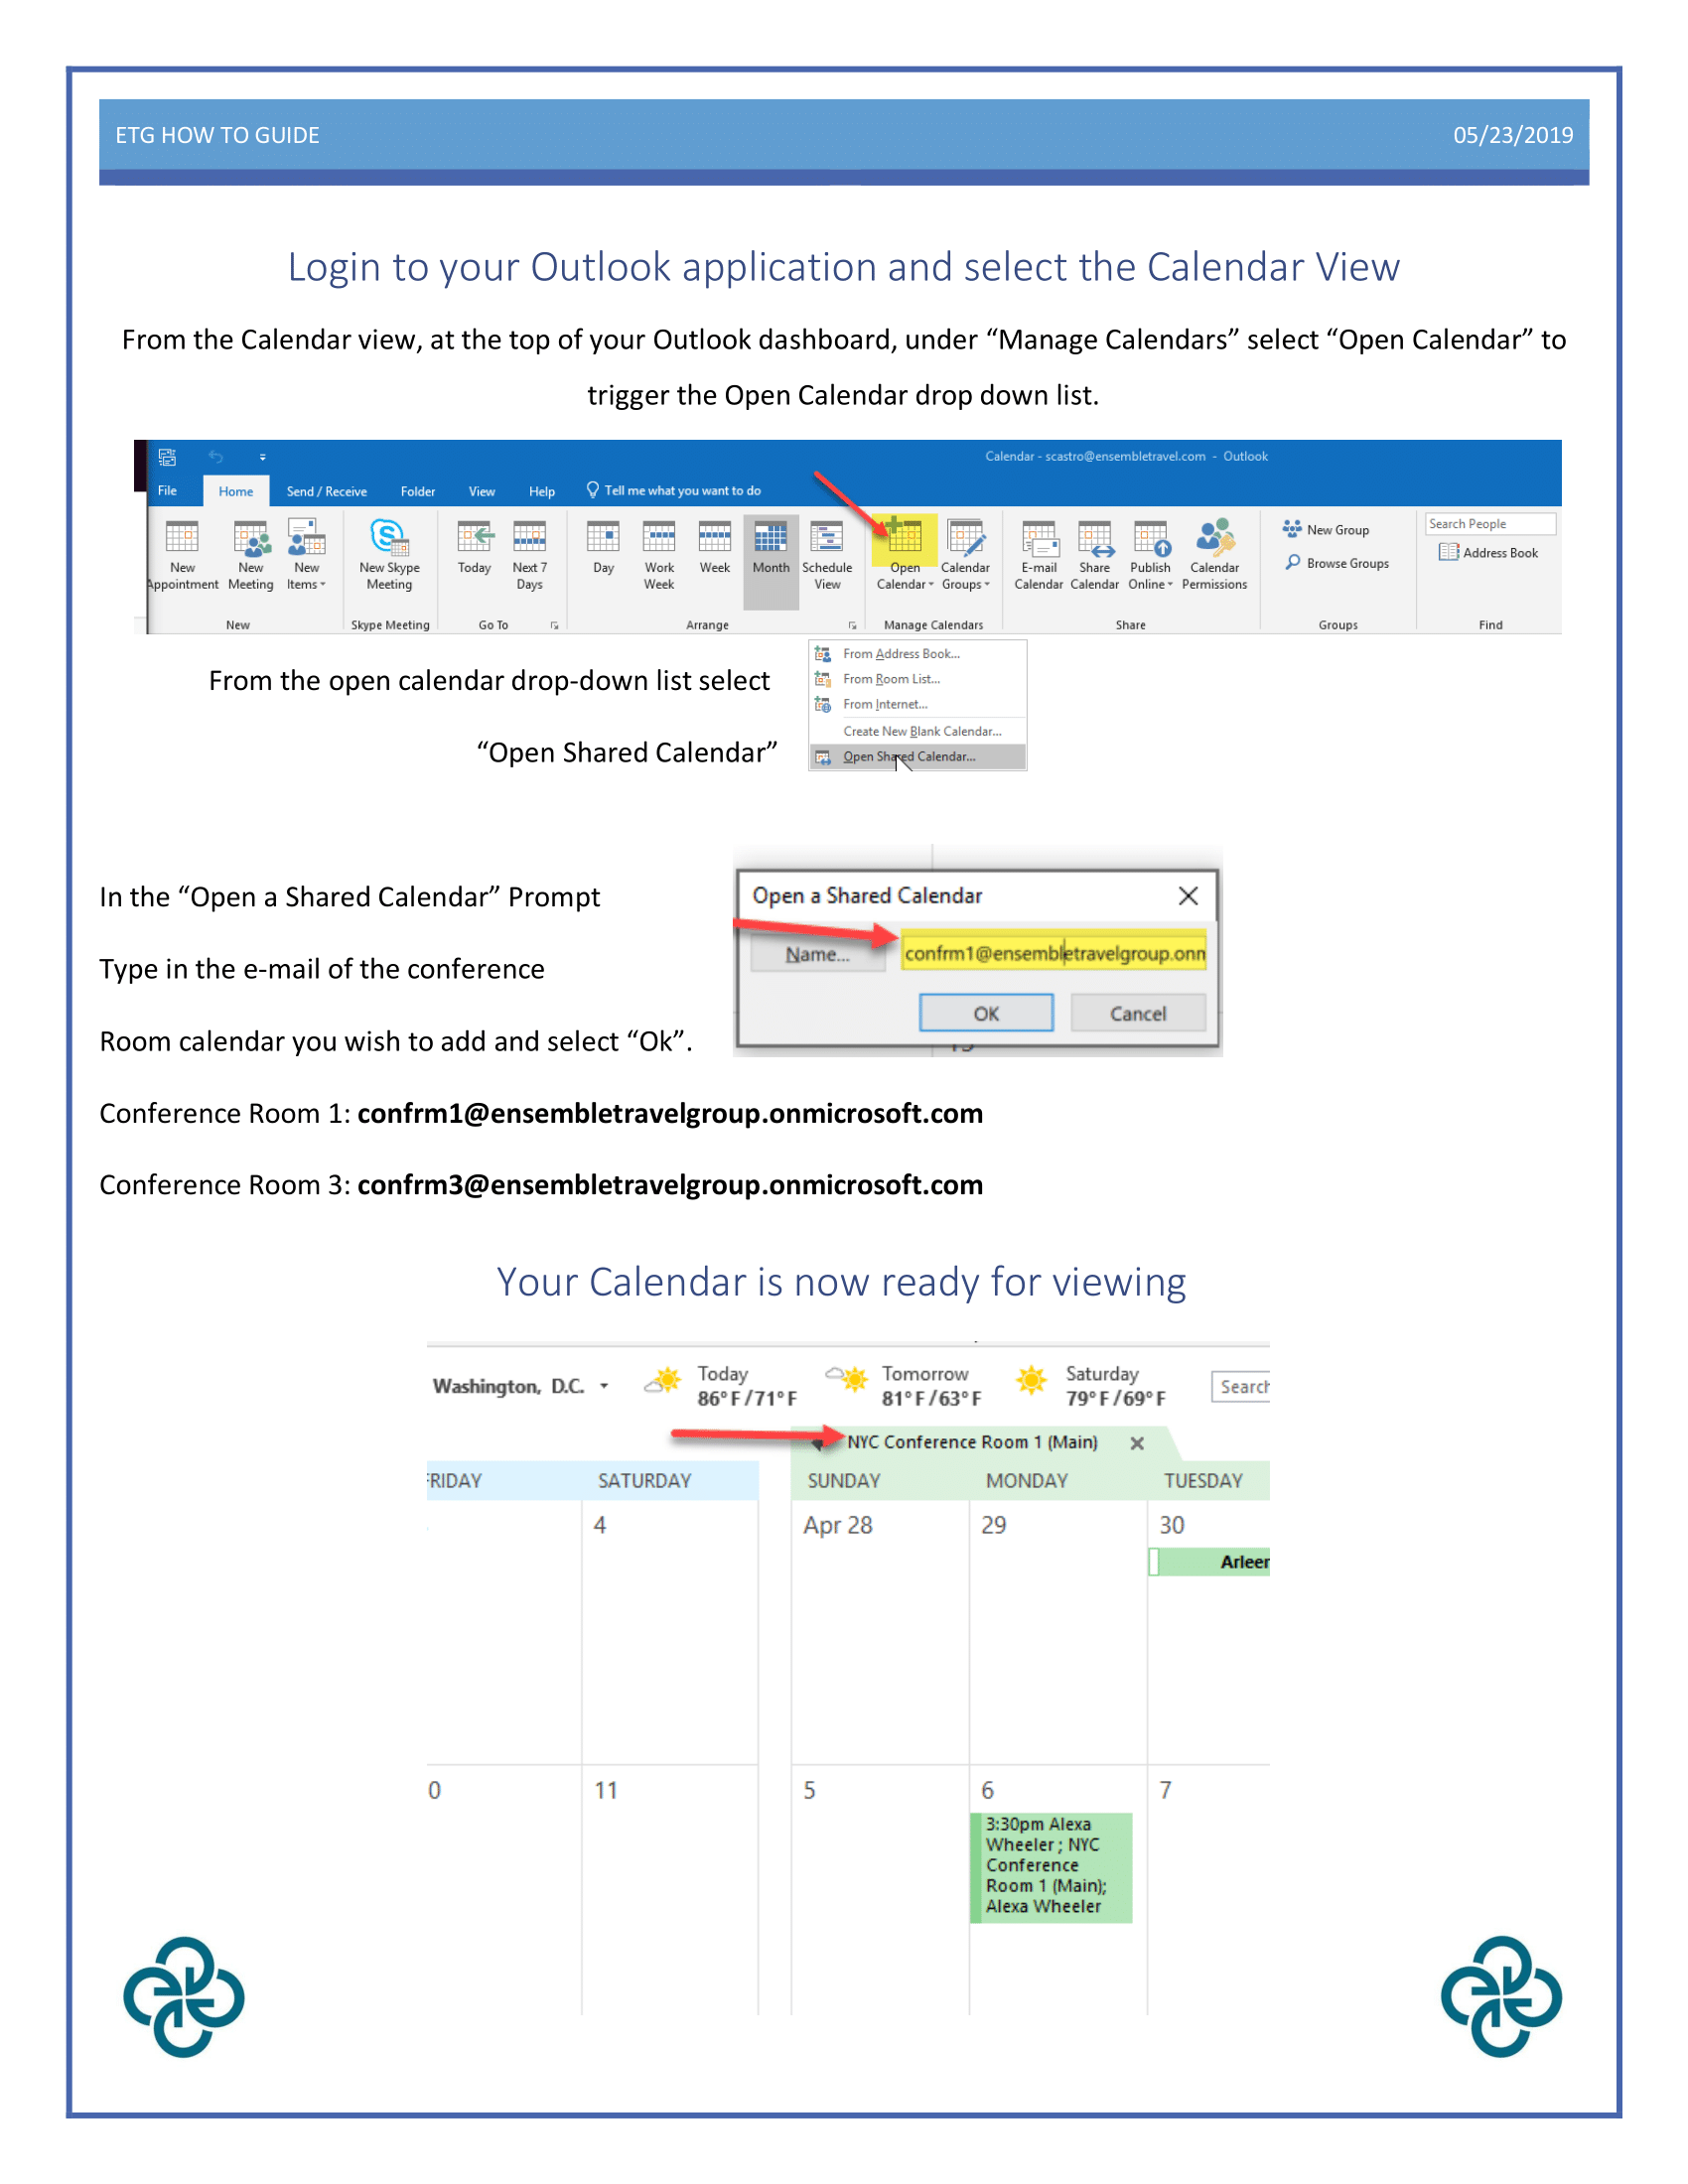 How do I add the conference room calendar to my Outlook? Technology